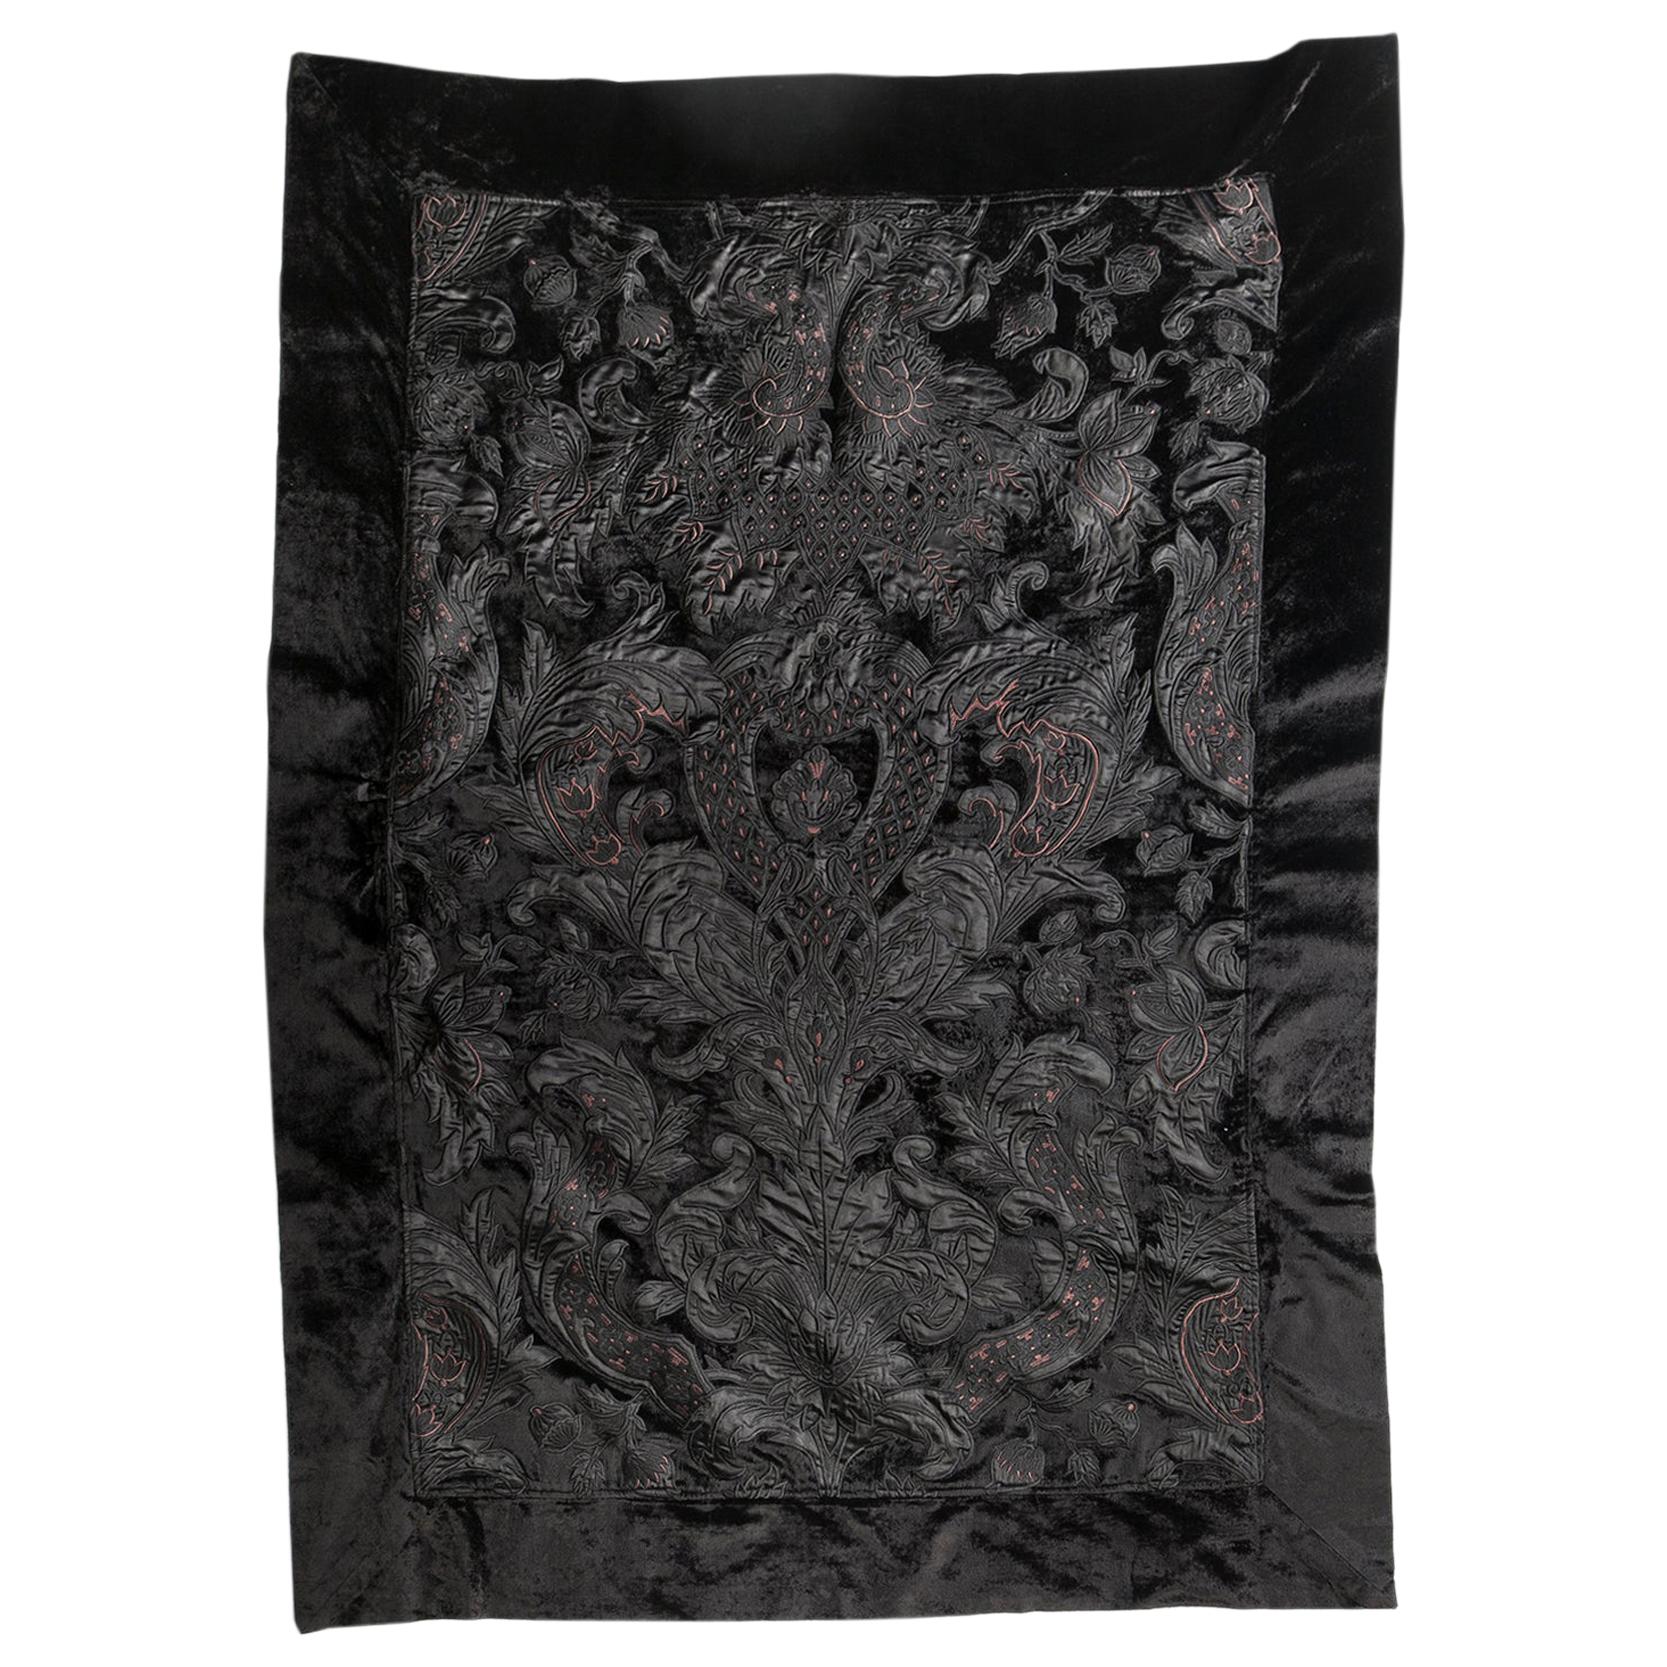 Velour Throw in Black with Black and Copper Satin Appliqué by Zuber For Sale